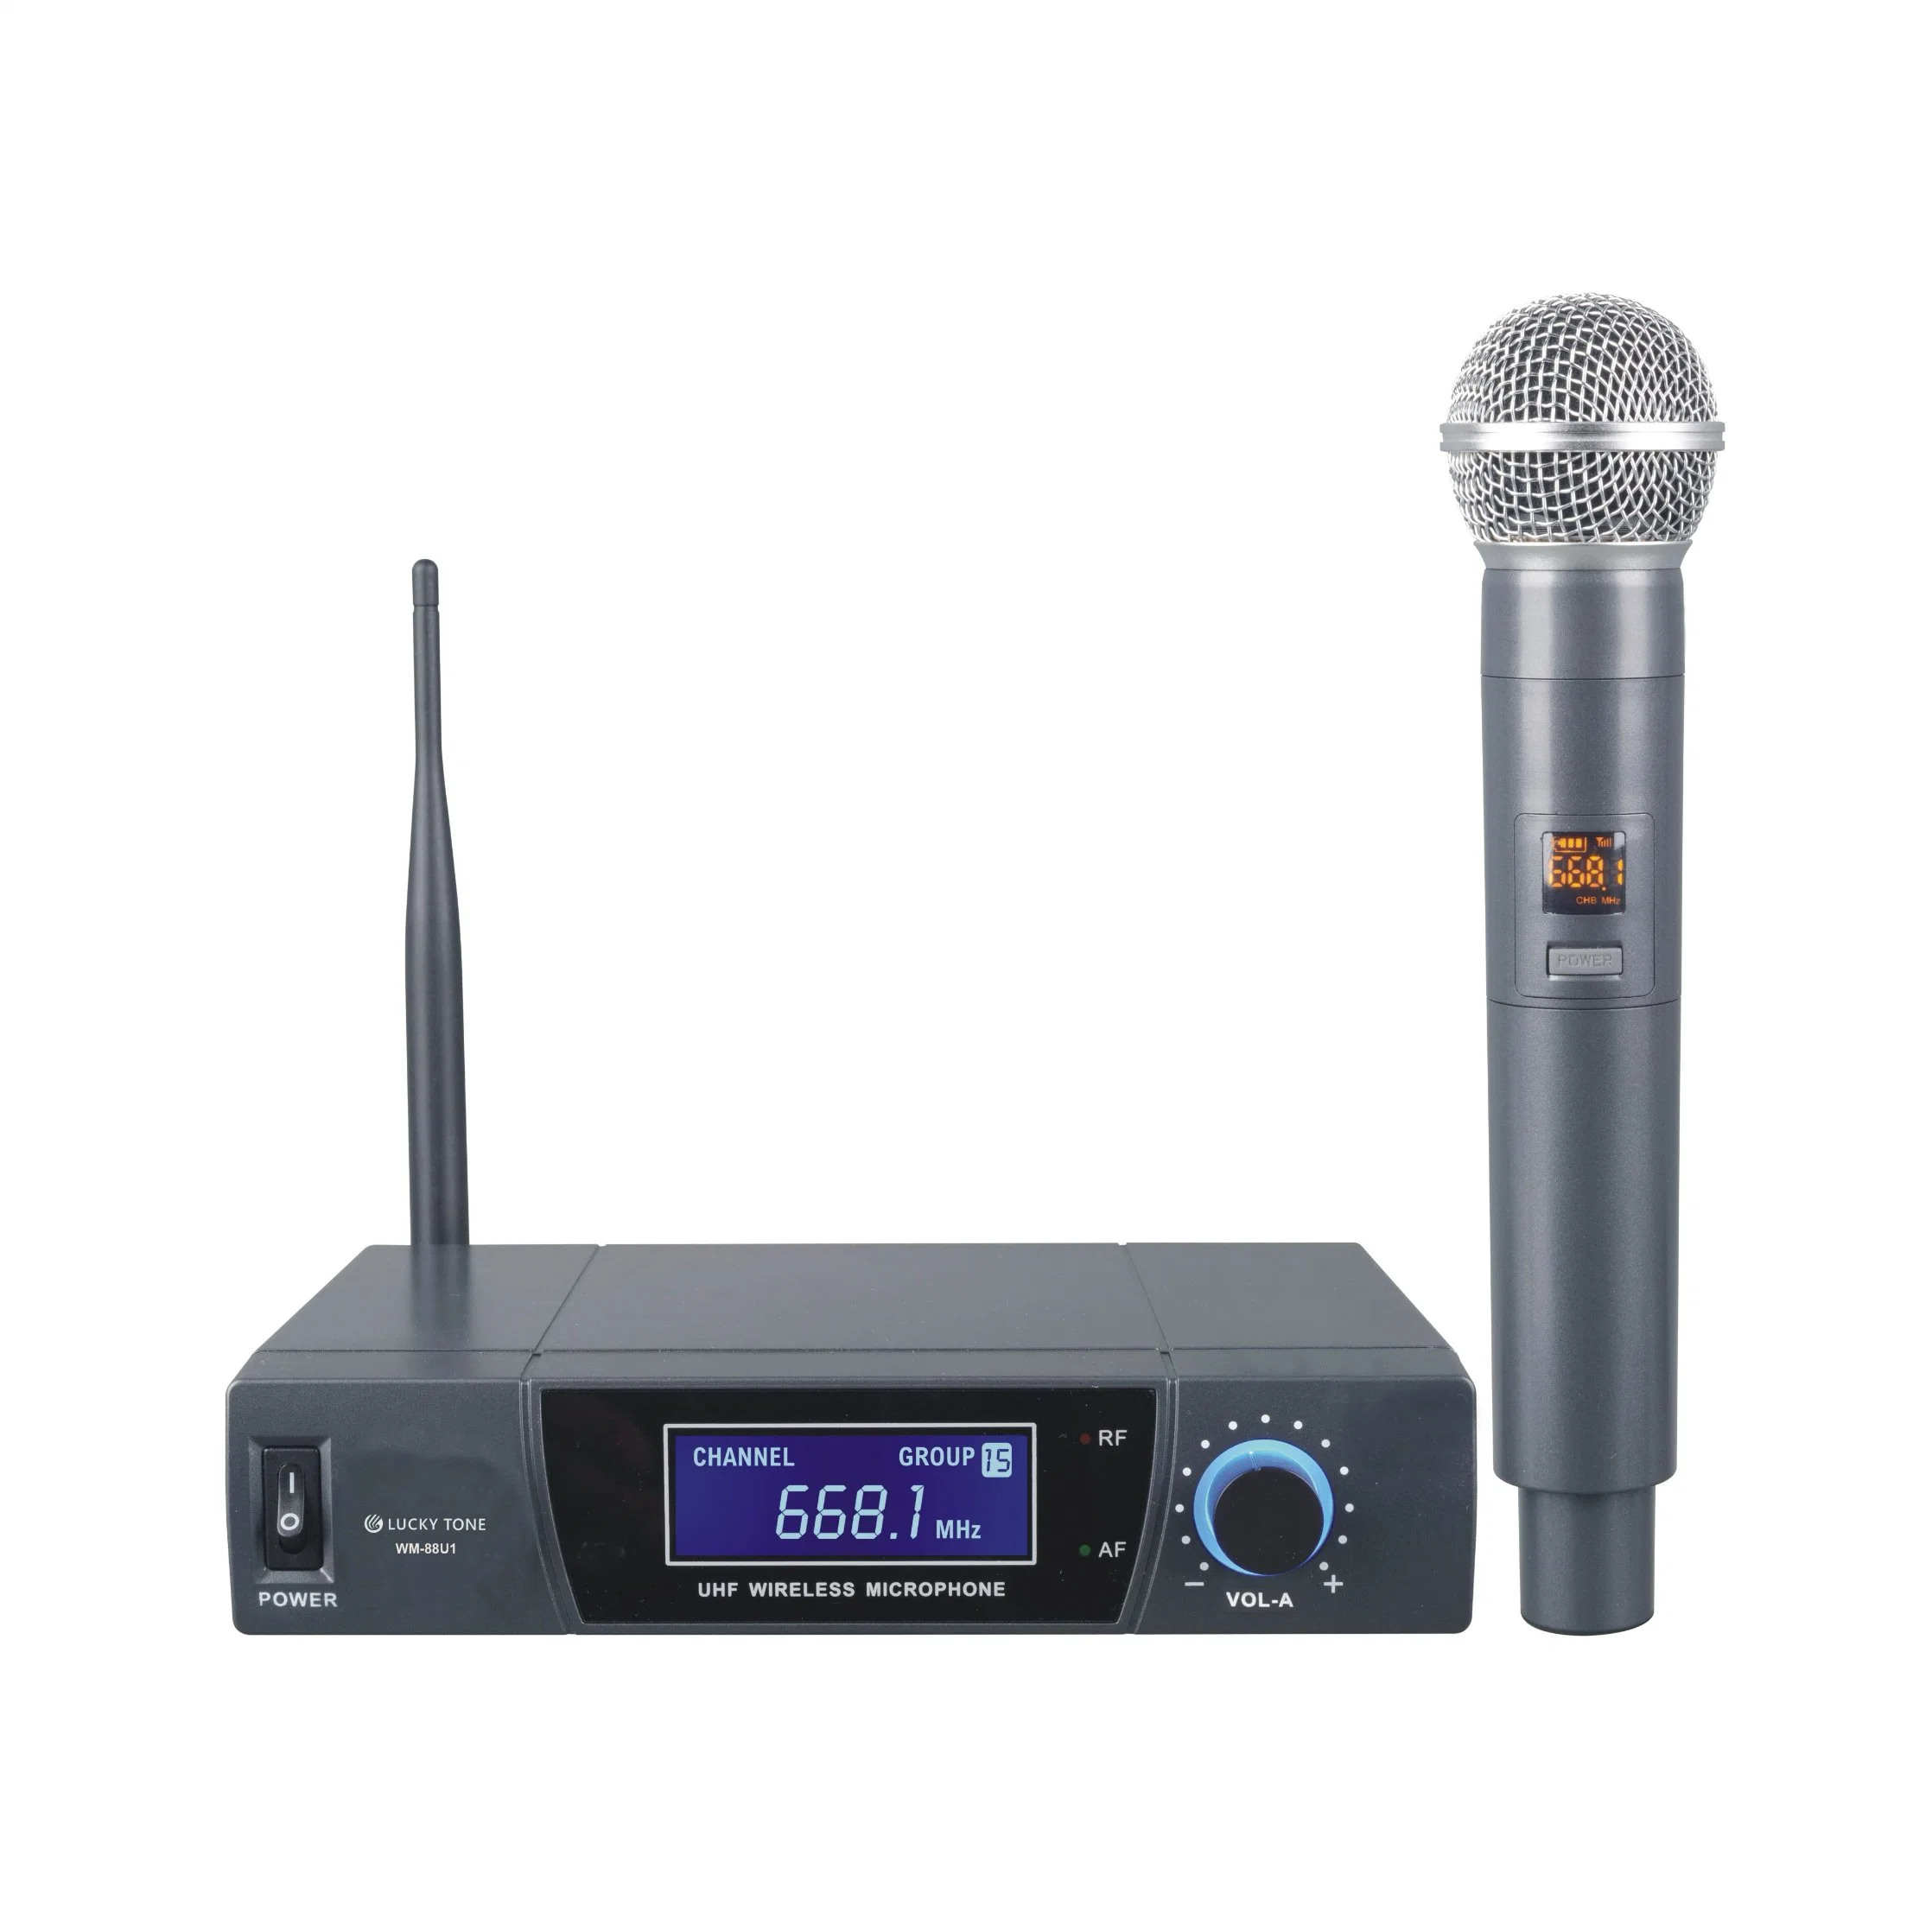 High Performance Single Channel Handheld Wireless UHF Microphone for KTV and Stage Performance